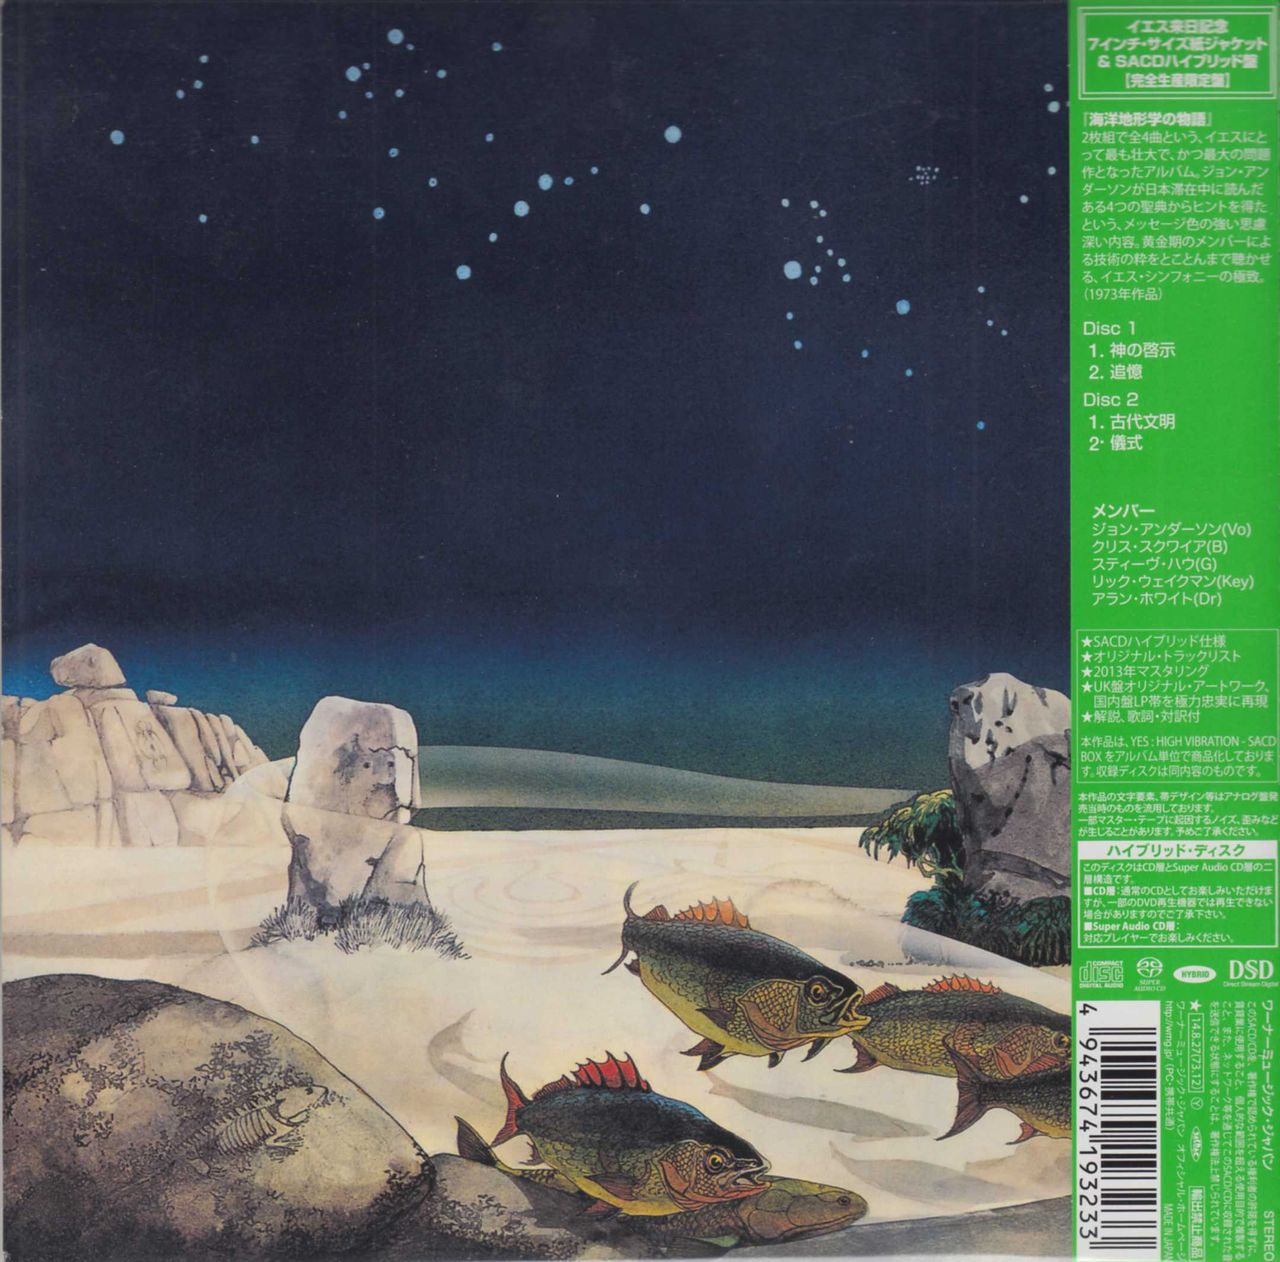 Yes Tales From Topographic Oceans Japanese Super audio CD